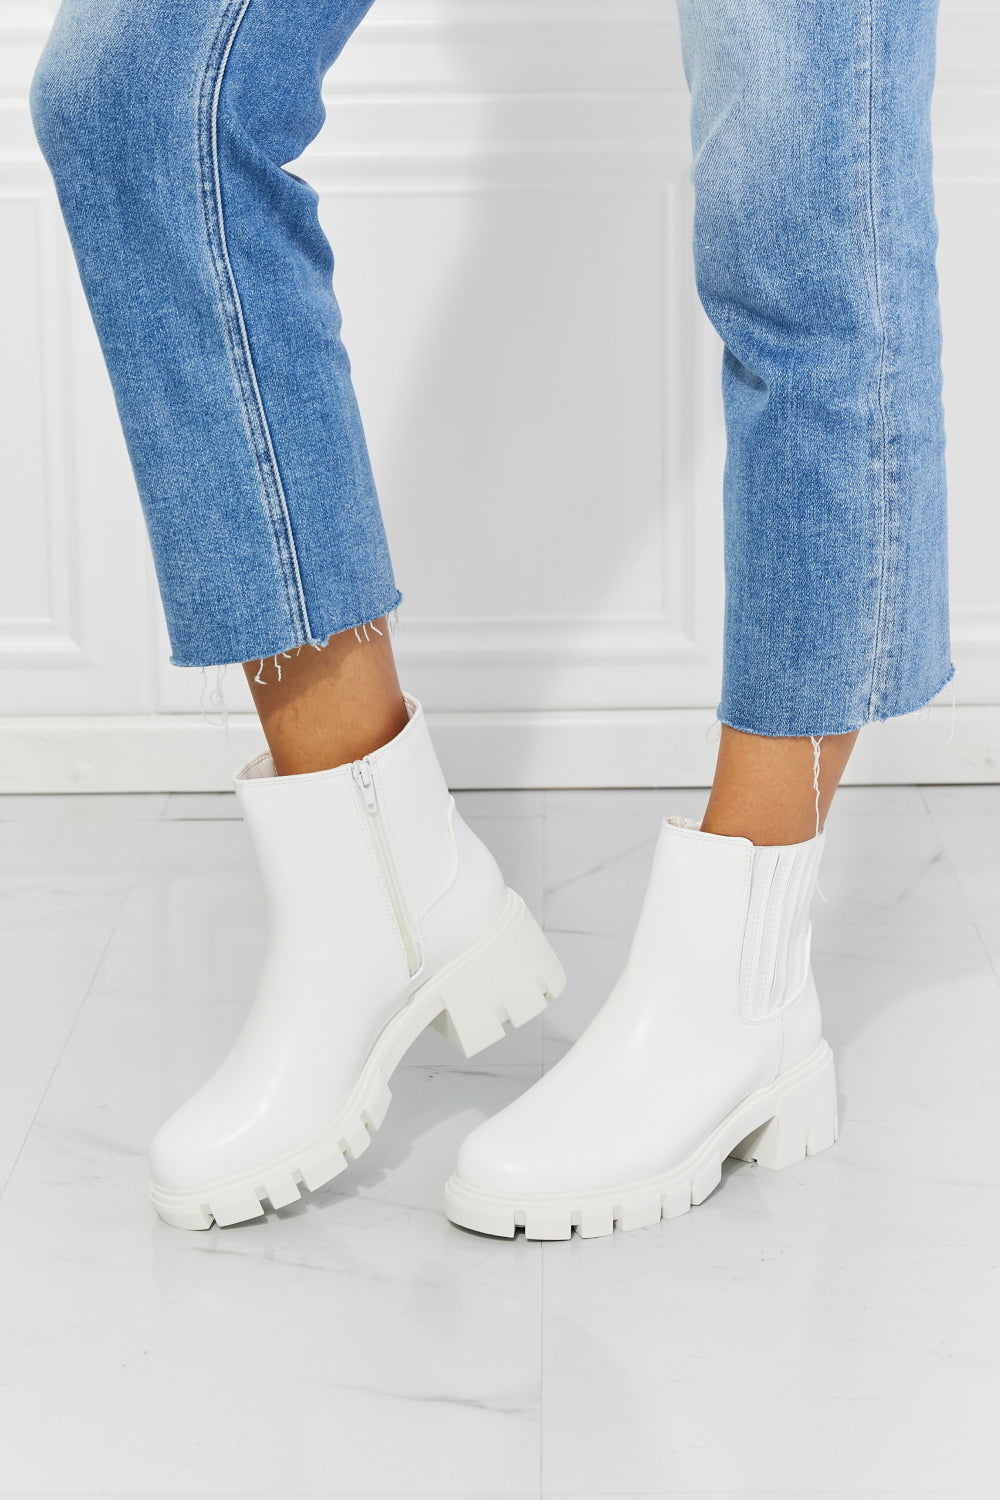 MMShoes What It Takes Lug Sole Chelsea Boots in White - AllIn Computer